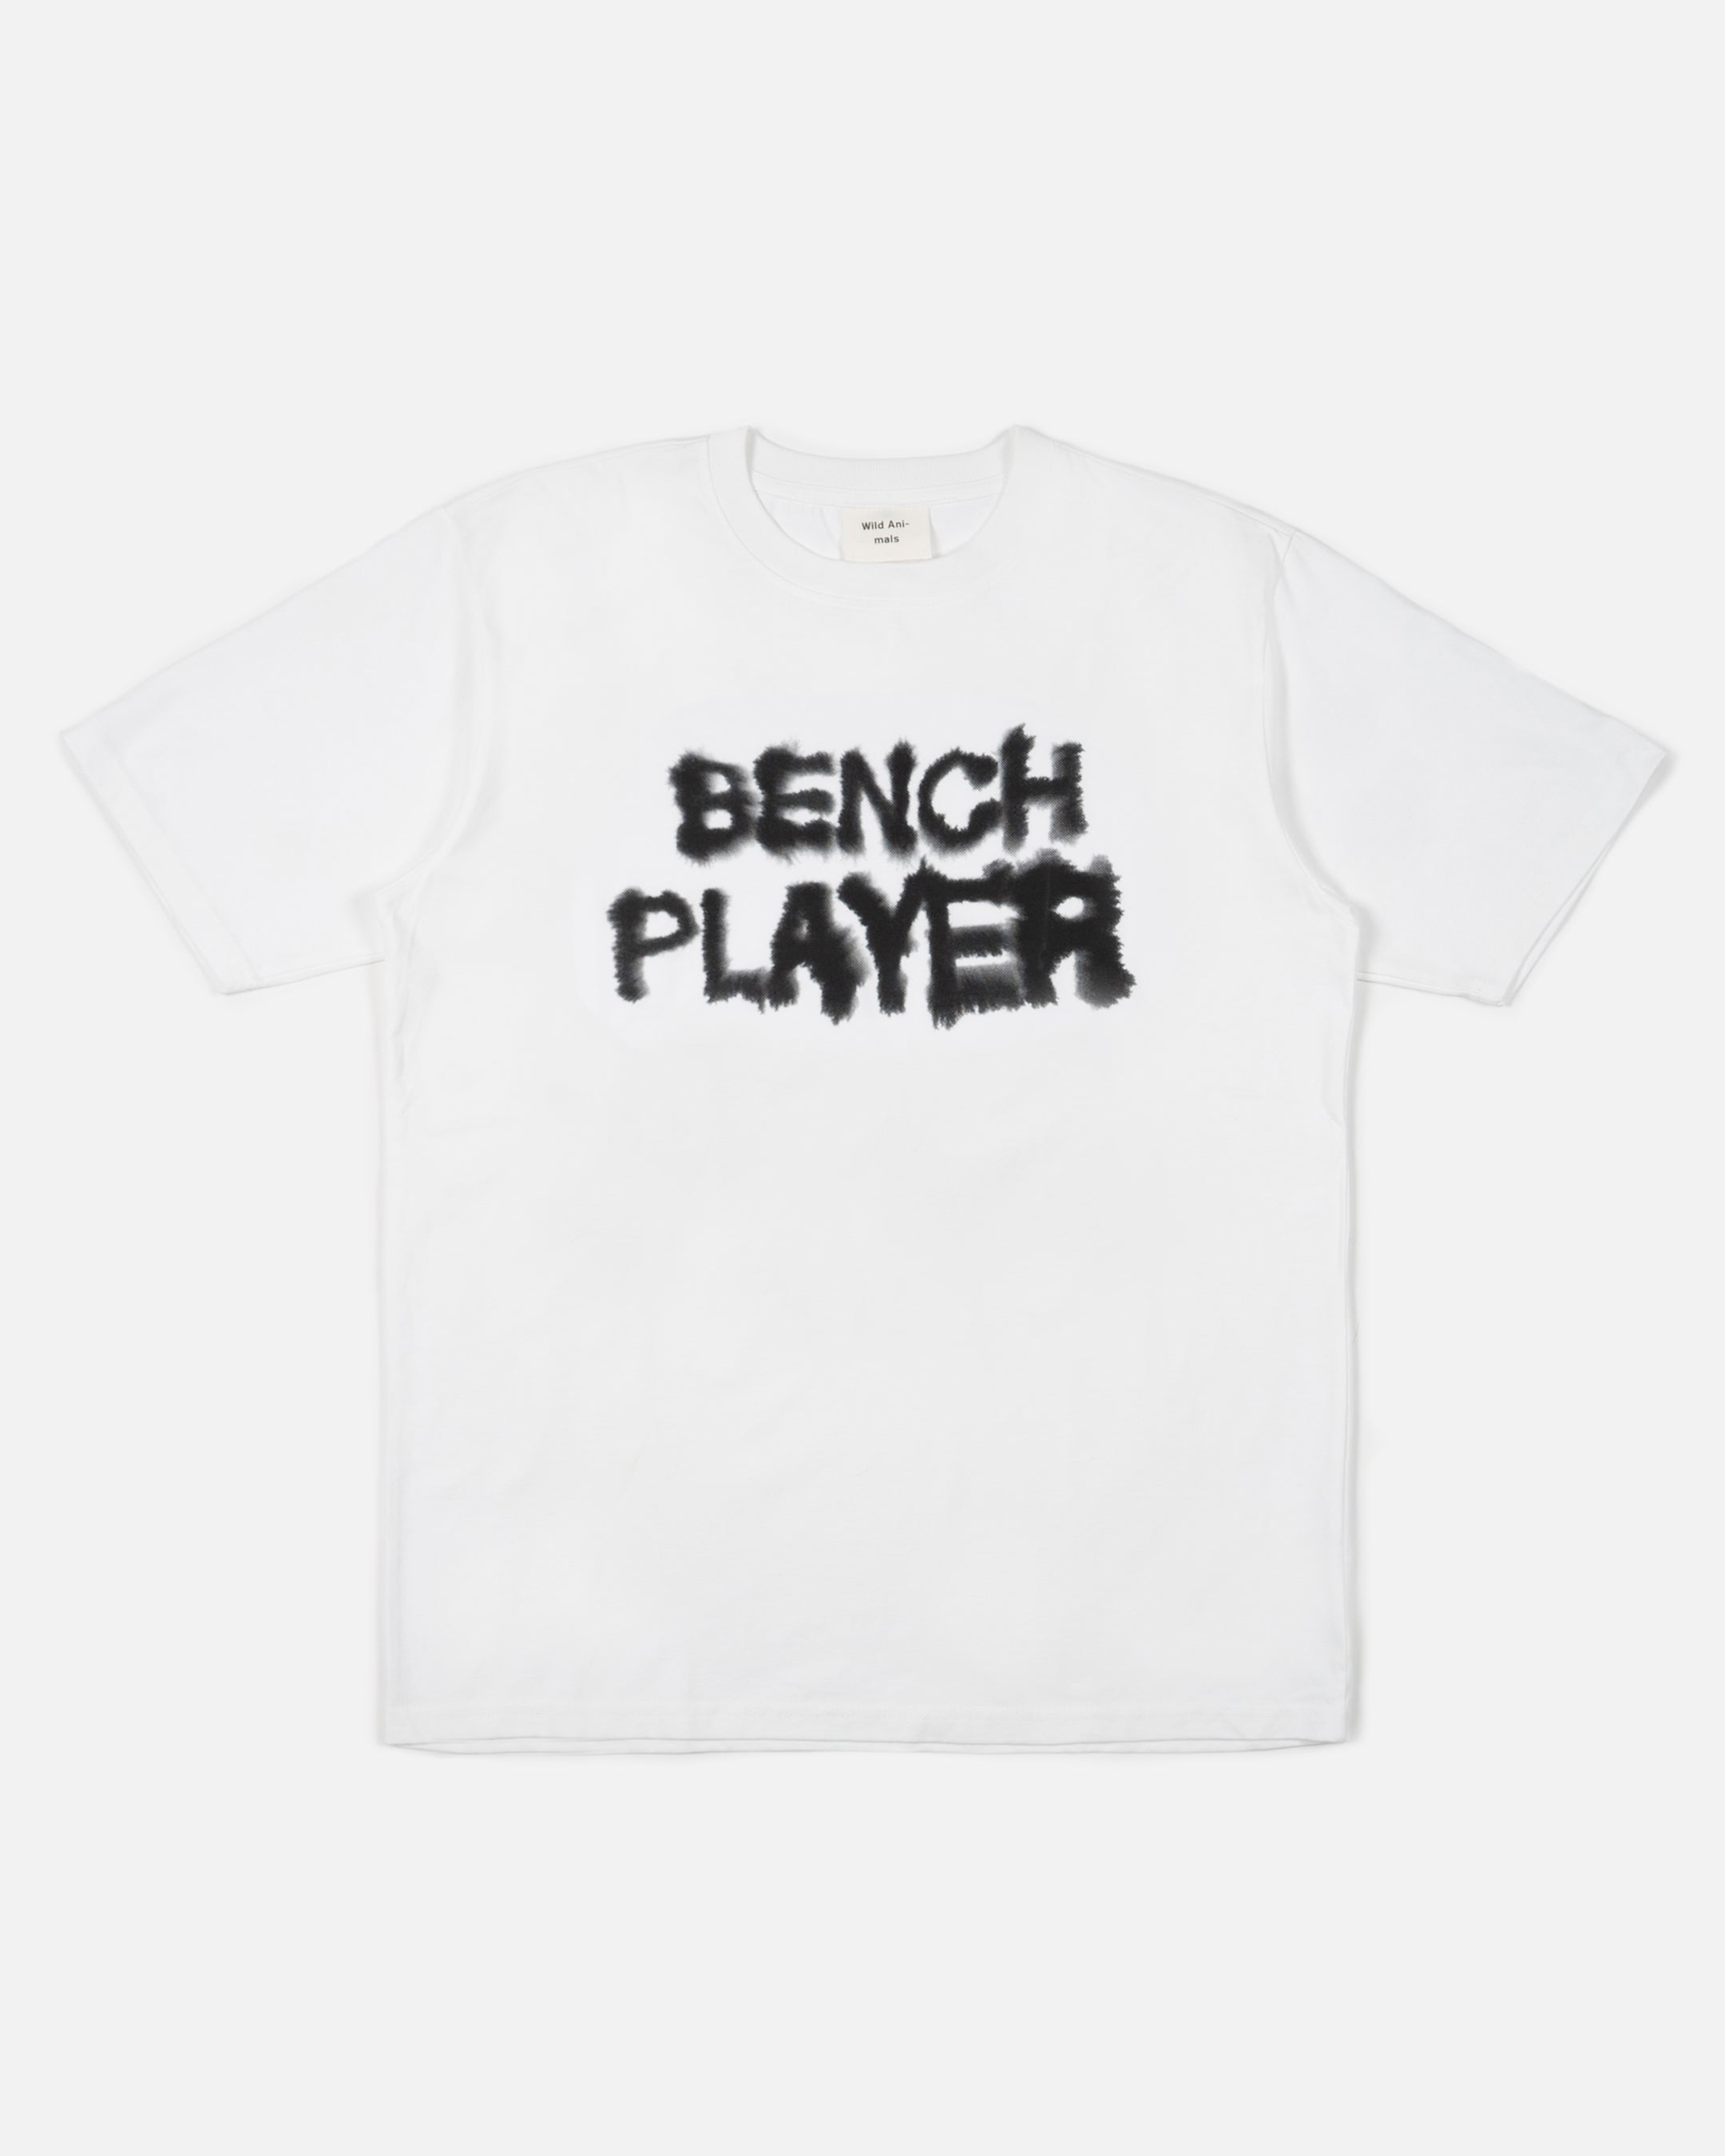 Bench Player Helvetica T-Shirt by Rop van Mierlo – Wild Animals | T-Shirts